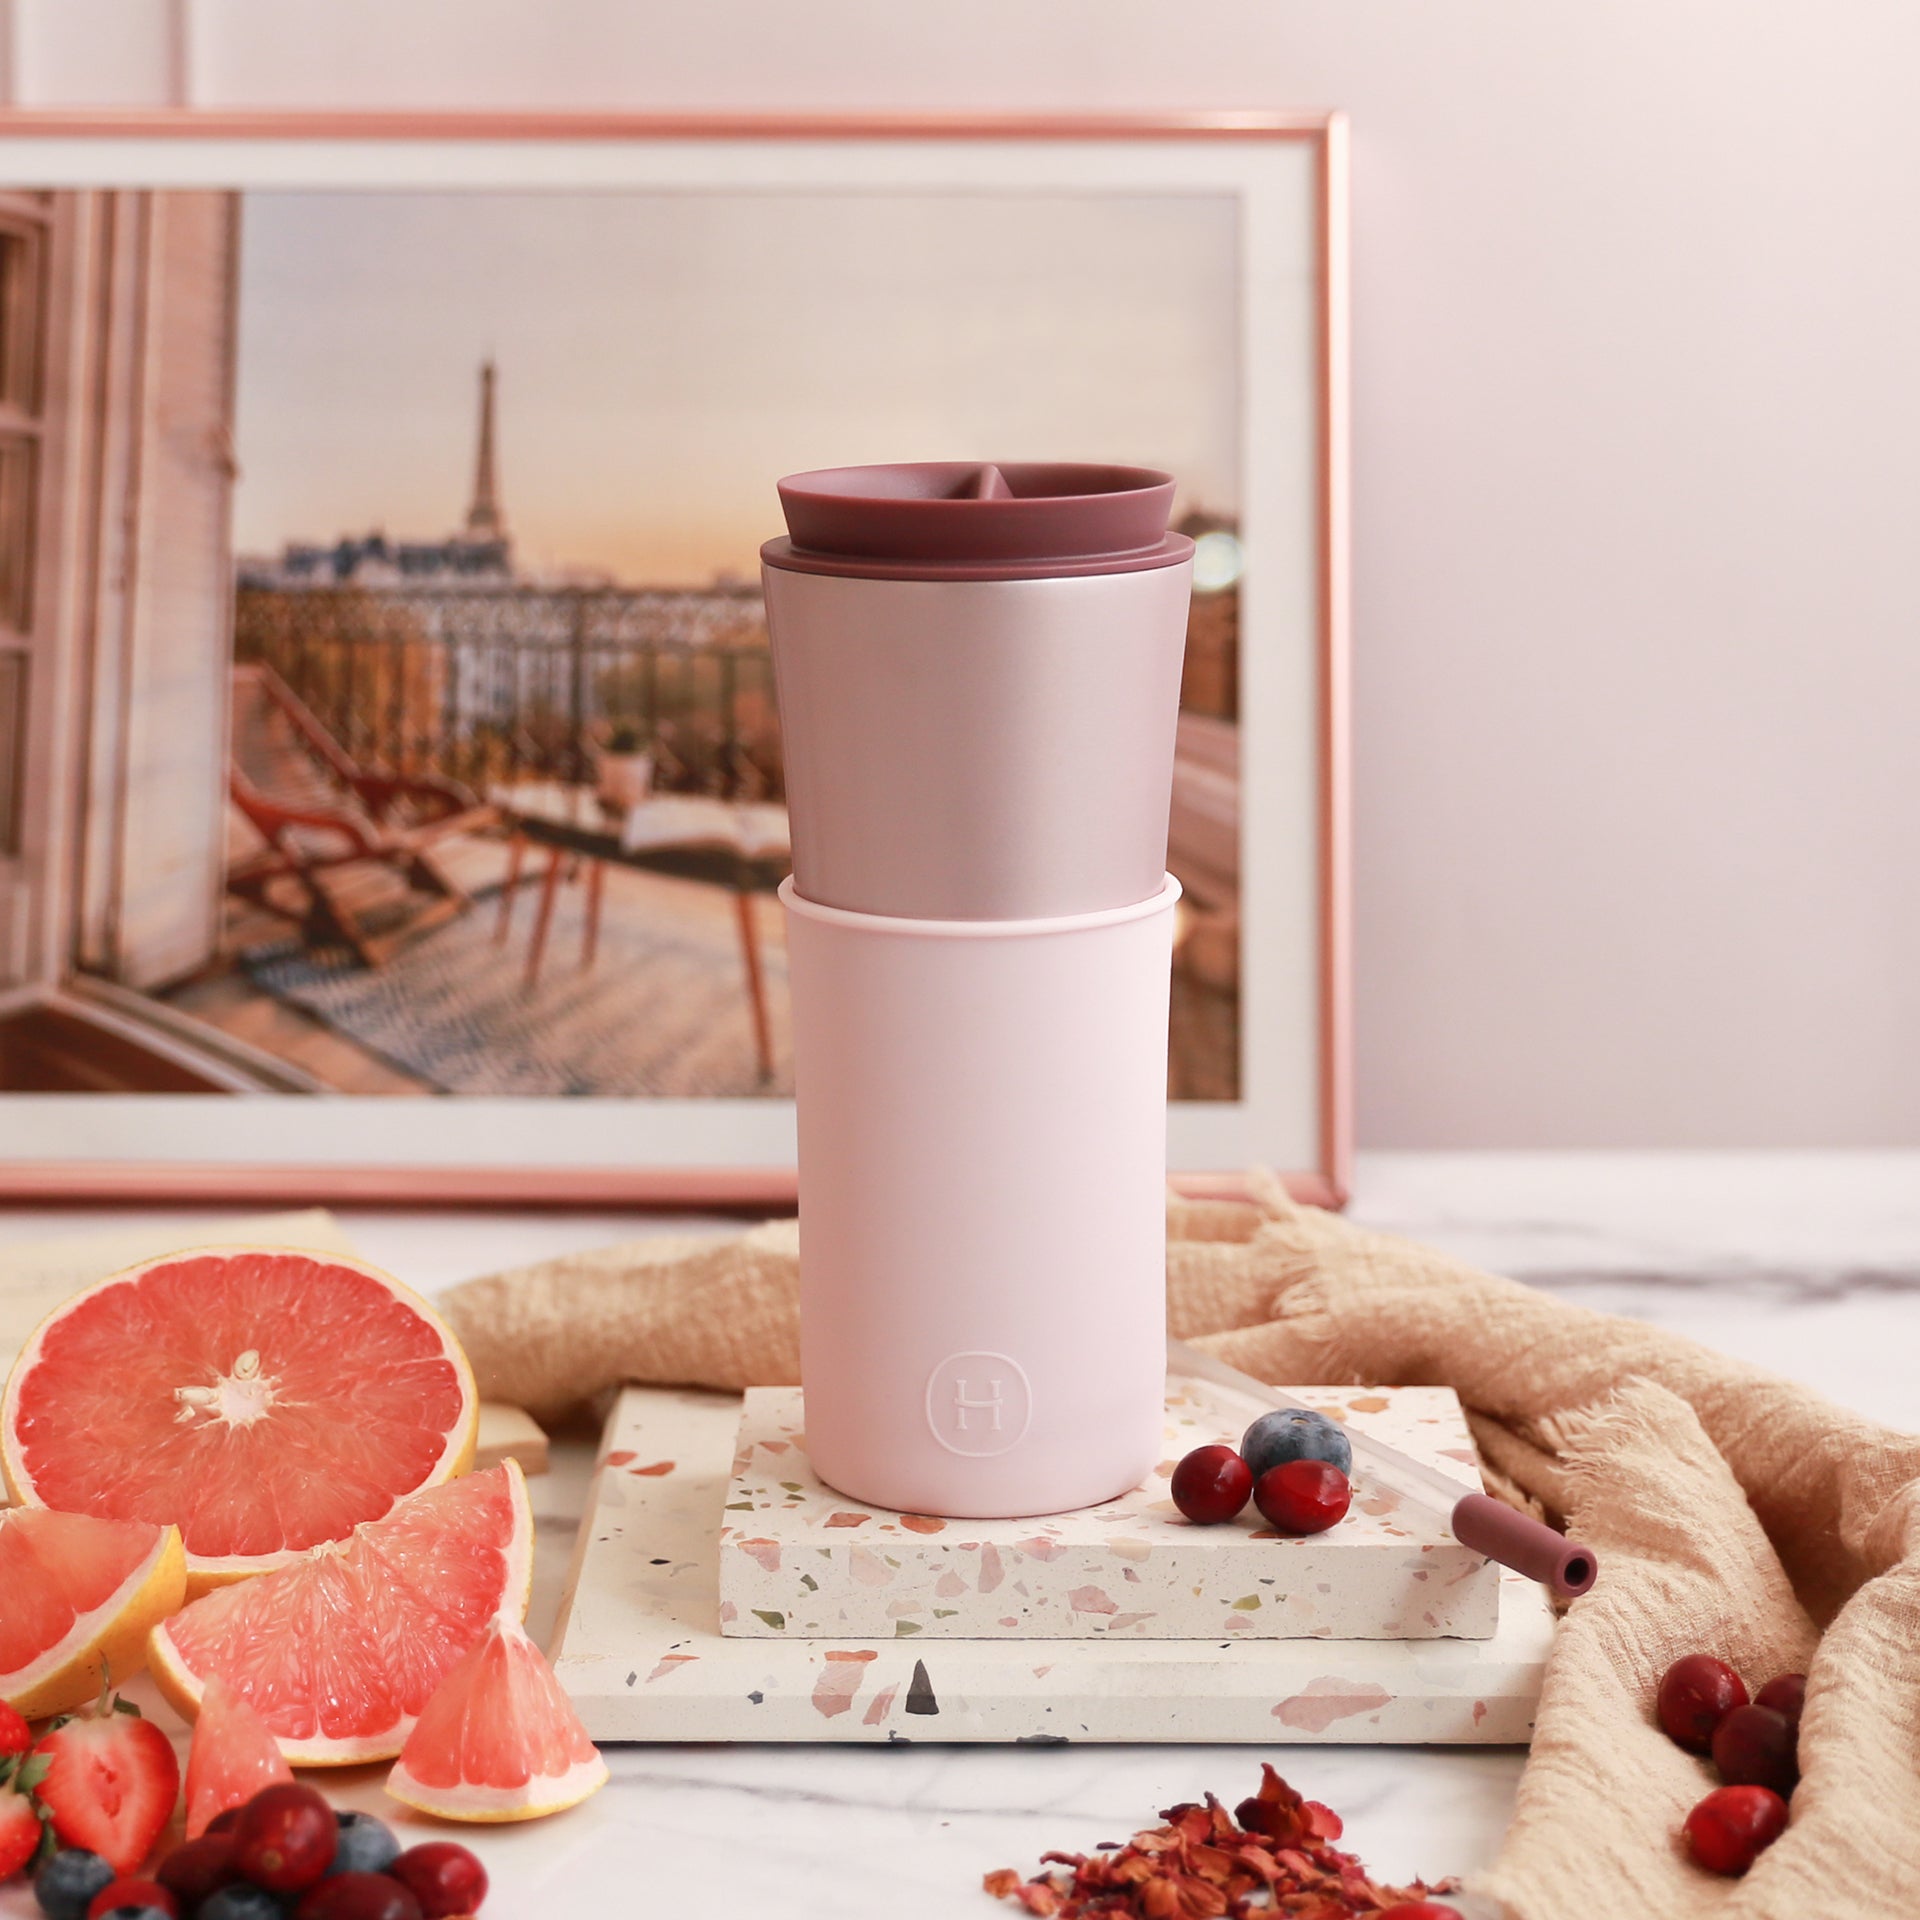 Insulated Travel Mug: How To Choose The Perfect One?